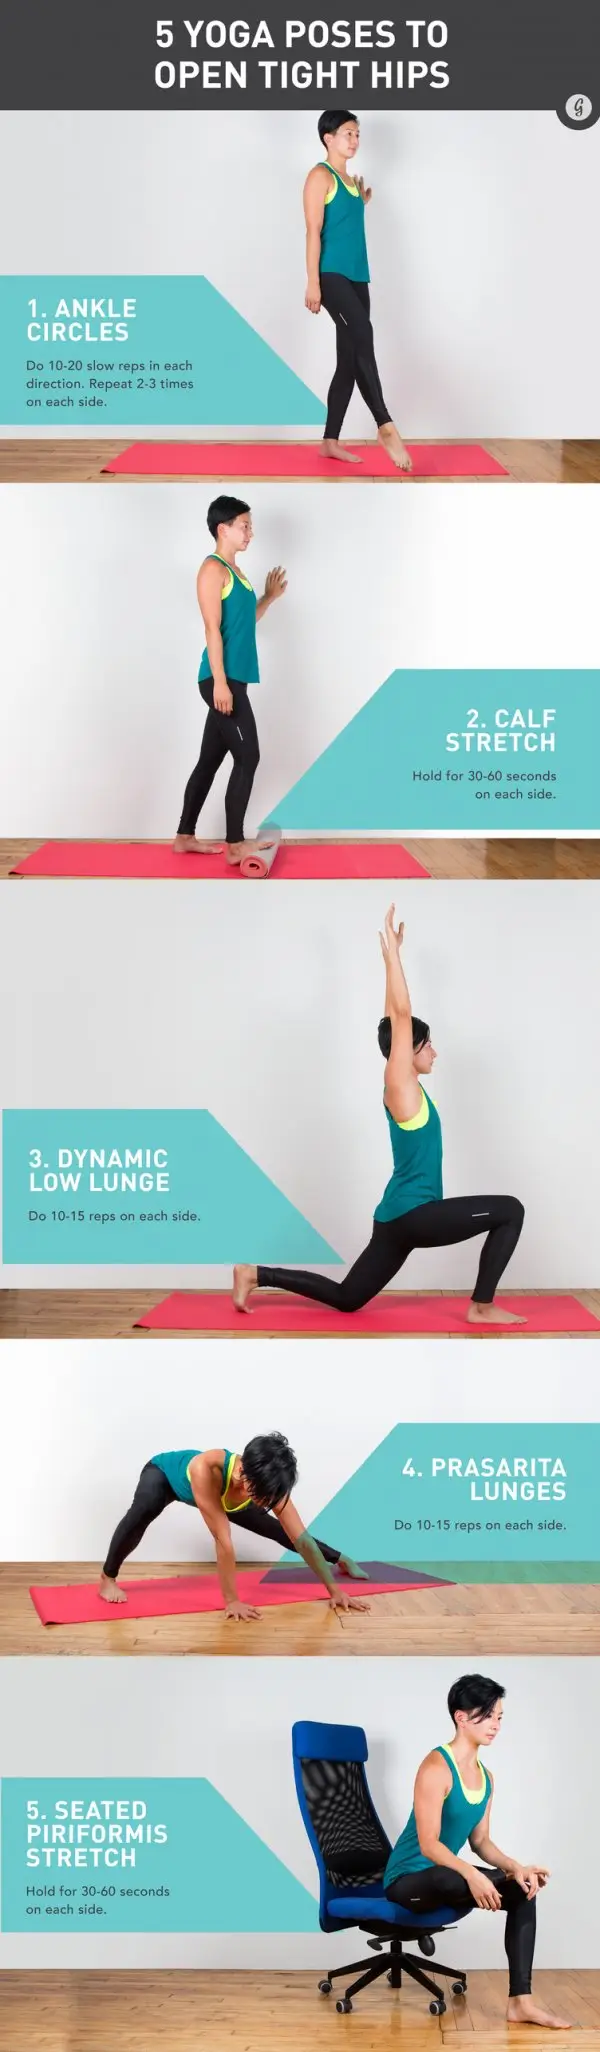 Yoga for Tight Hips